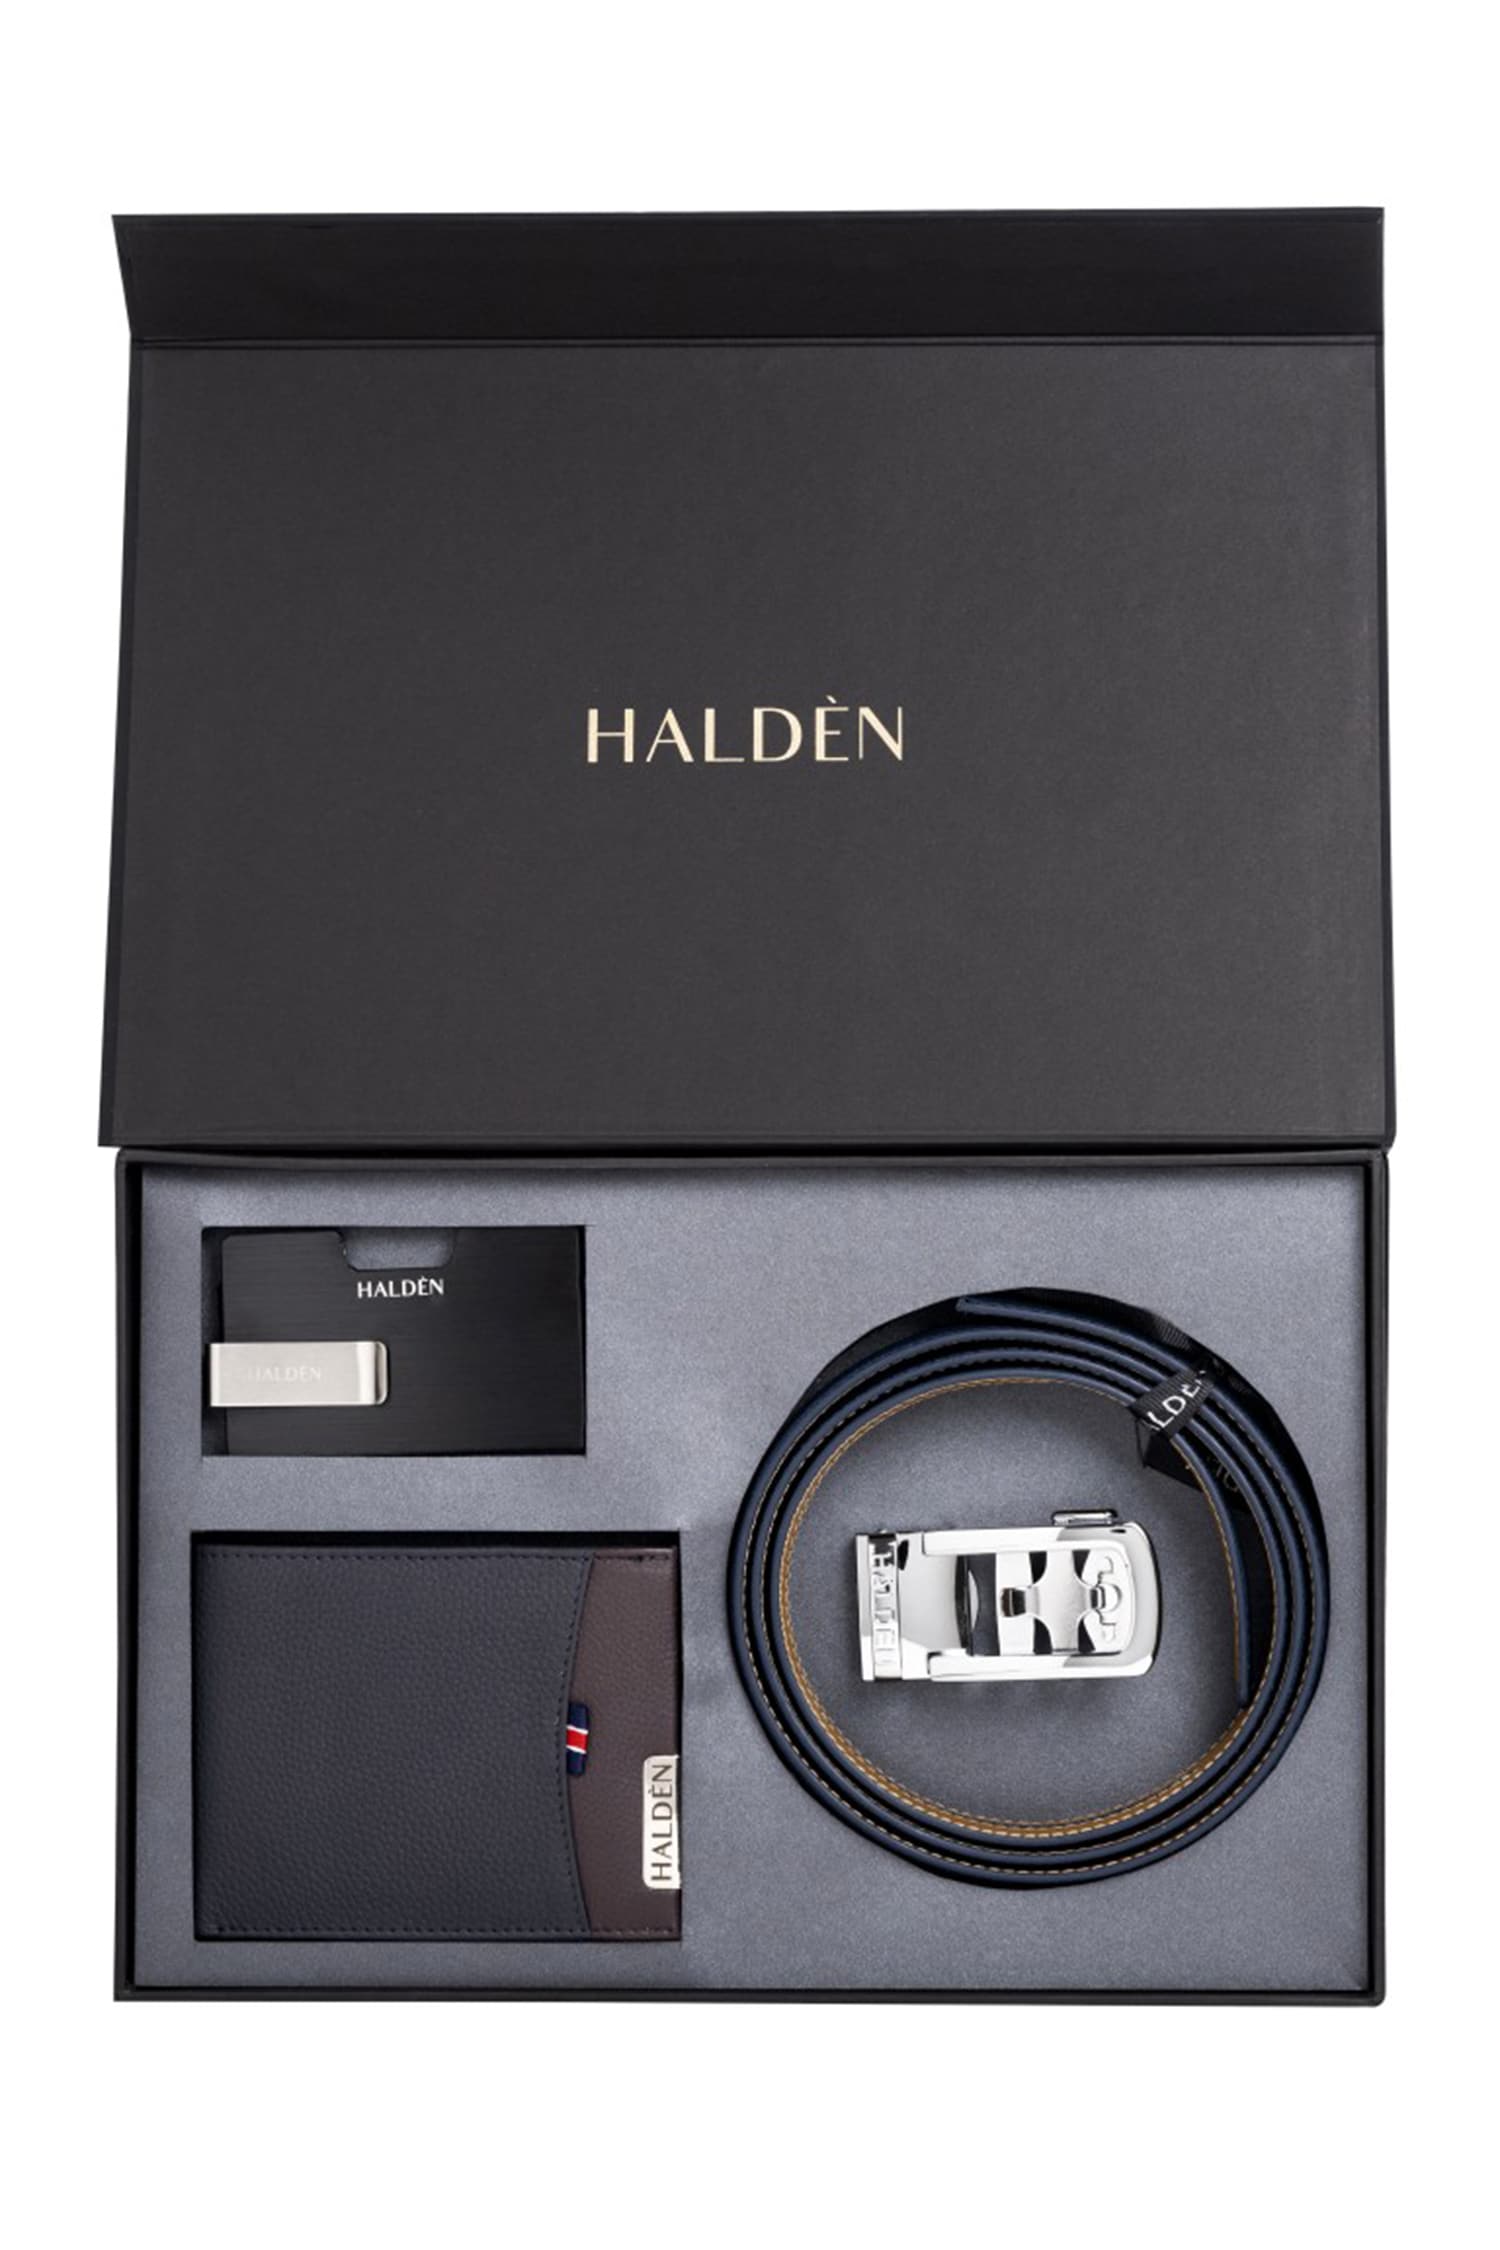 Buy HALDEN Men's Theo Tan Belts, Quality leather, Free size, Fits up to 44  inches waist, Ratchet straps, unique magnetic buckle, Autolock belt, Black  Glossy Buckle at Amazon.in